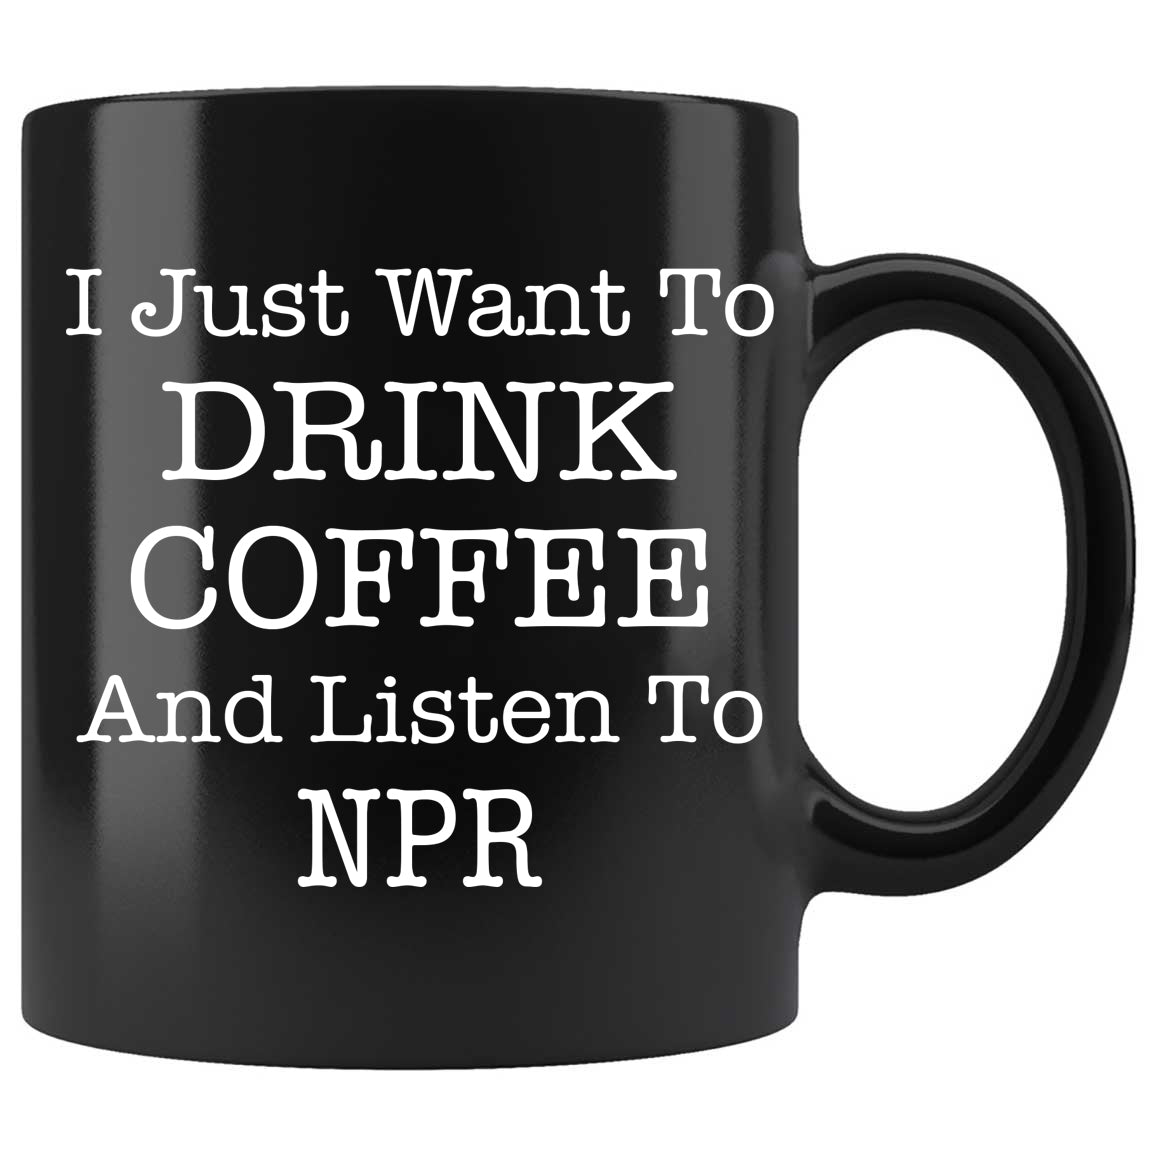 I Just Want To Drink Coffee And Listen To NPR Skitongifts Funny Ceramic Coffee Mug For Birthday, Mother's Day, Father's Day, Christmas